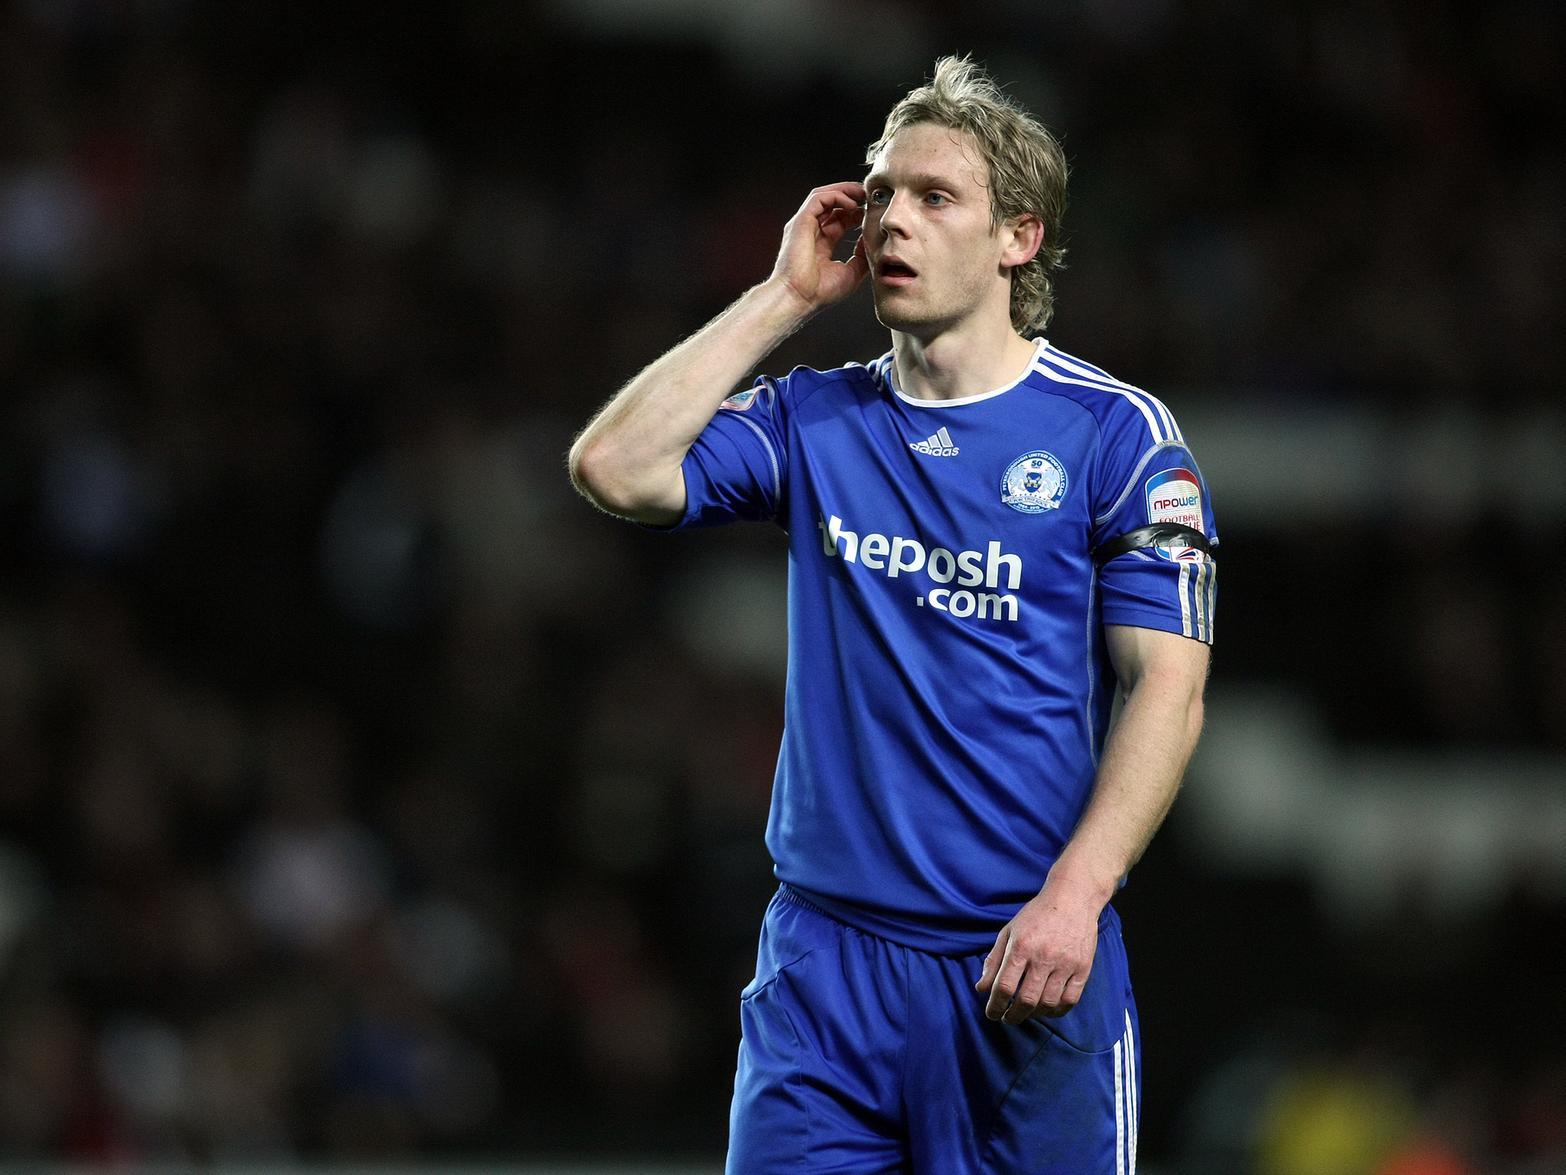 Mackail-Smith, now 34, is contracted to Wycombe Wanderers but is currently out on loan at Stevenage.